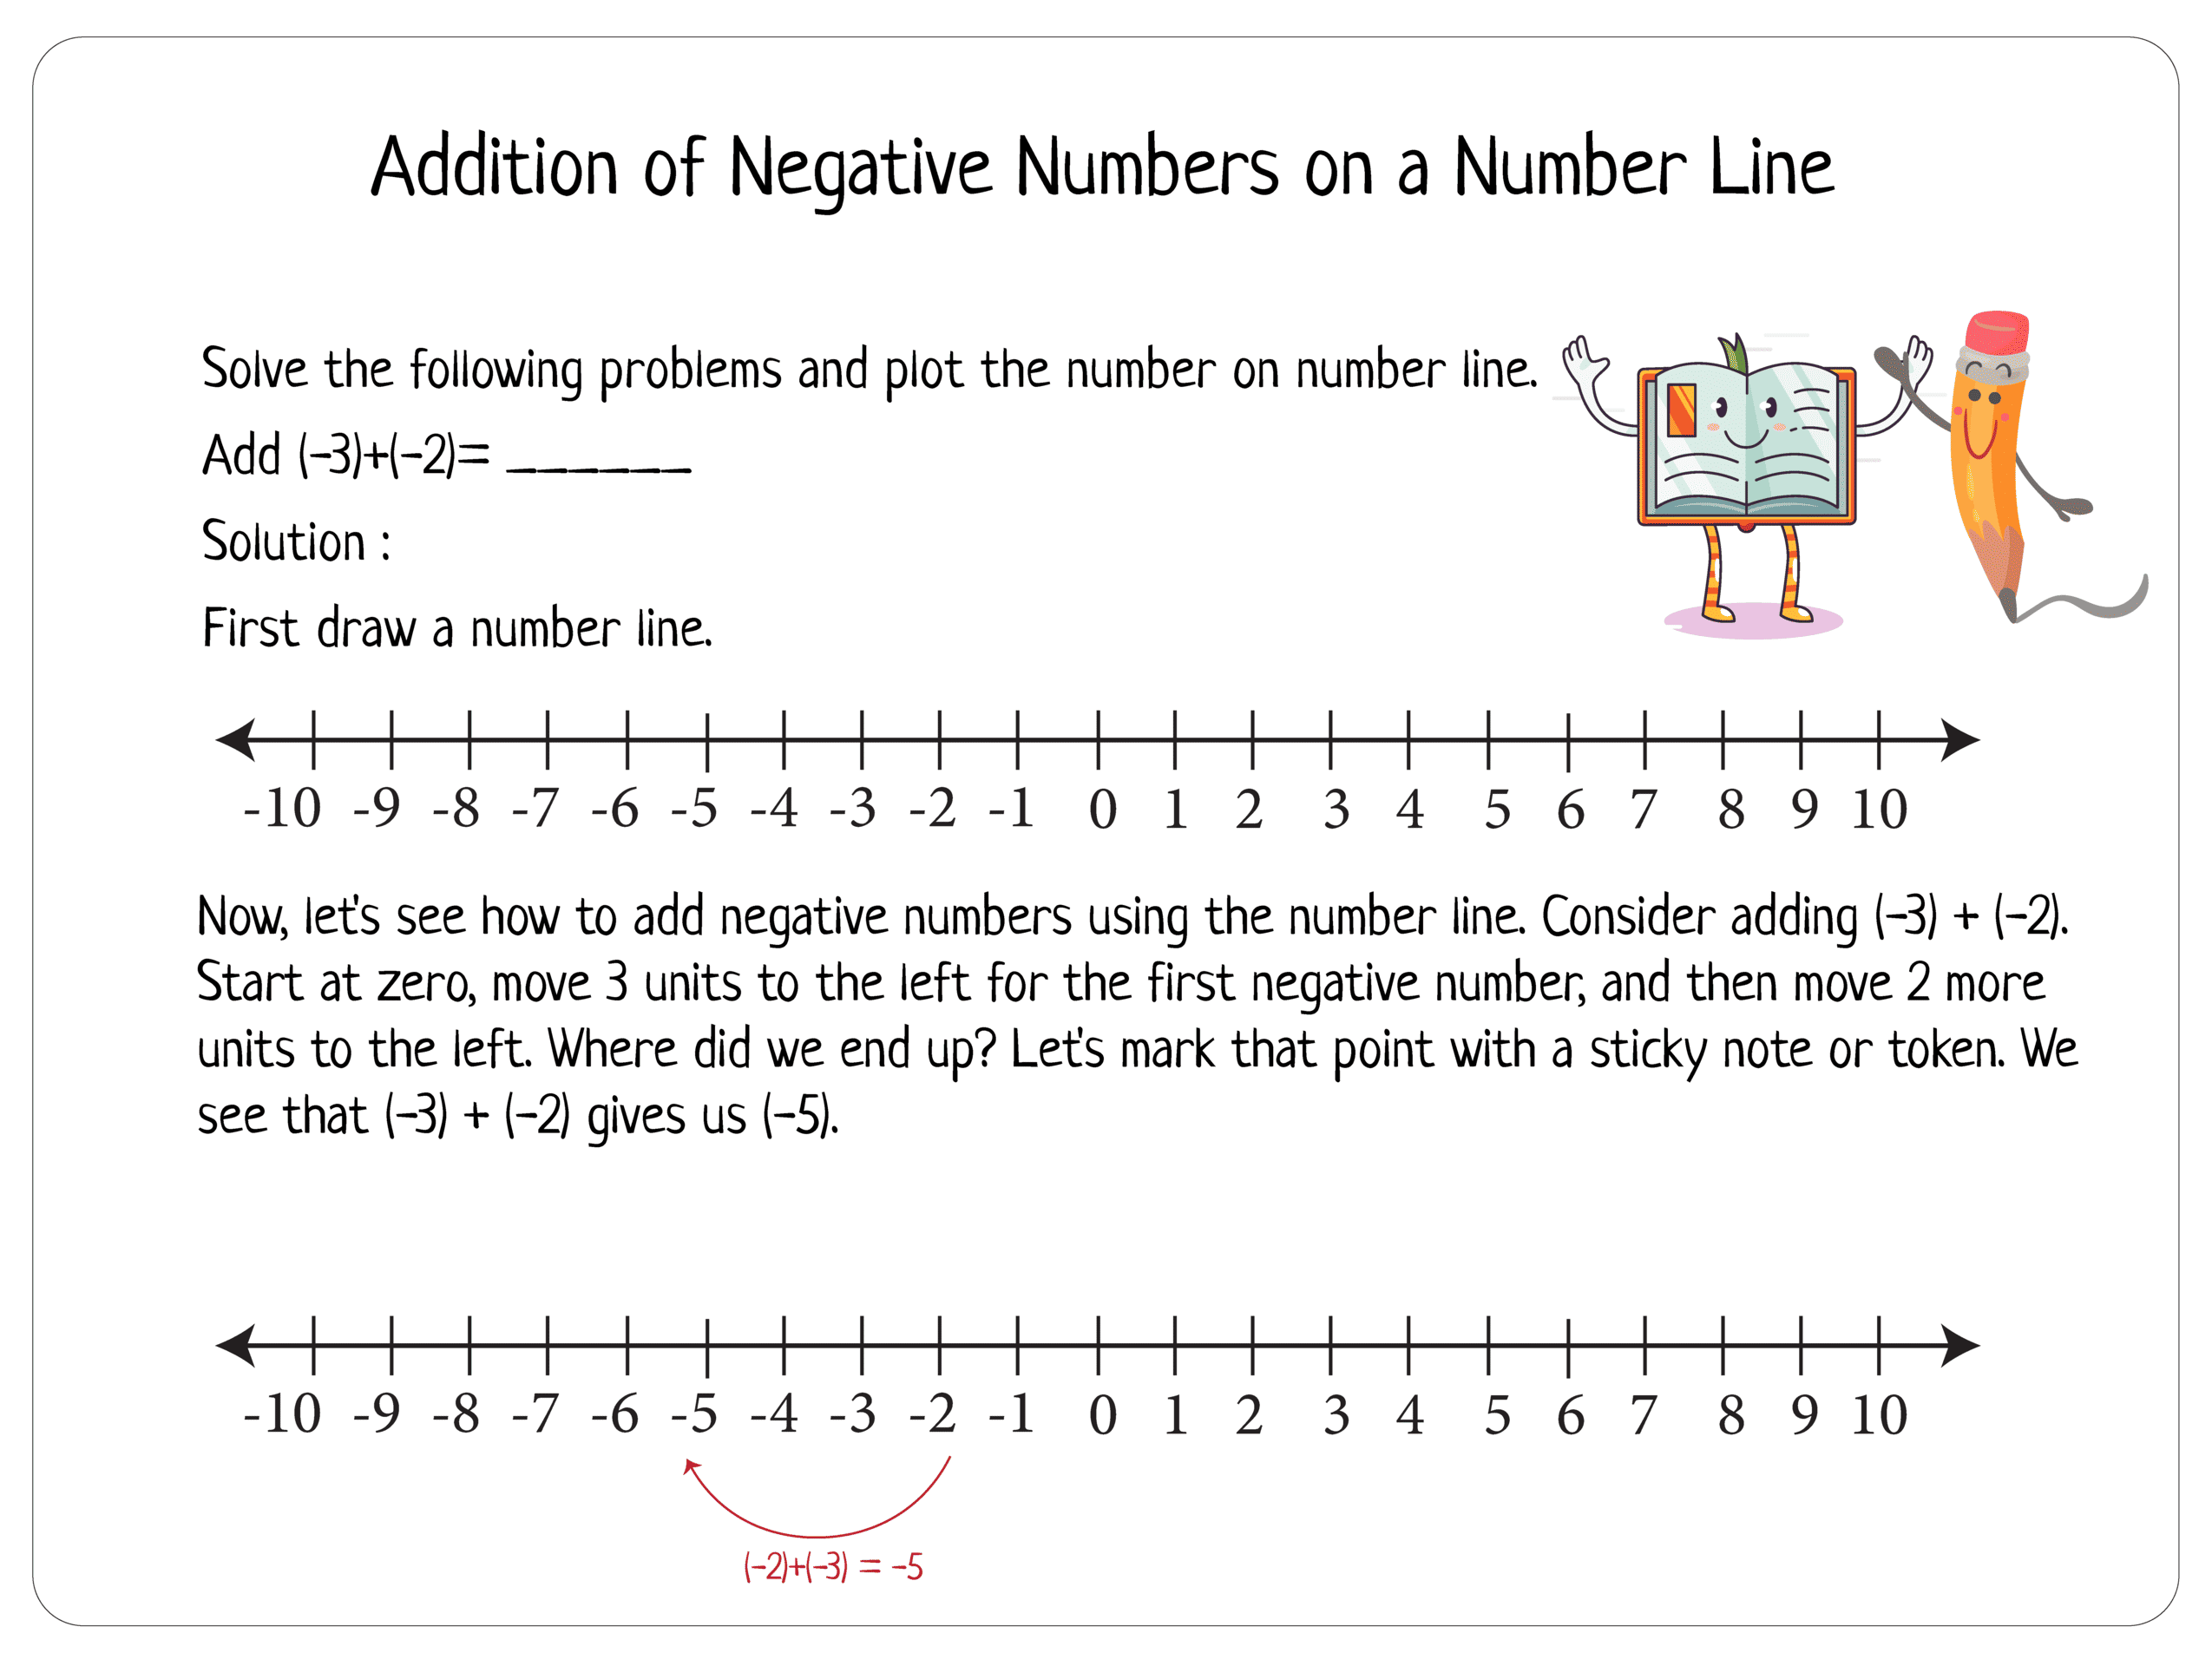 Steps of plotting negative numbers on a number line (4) 